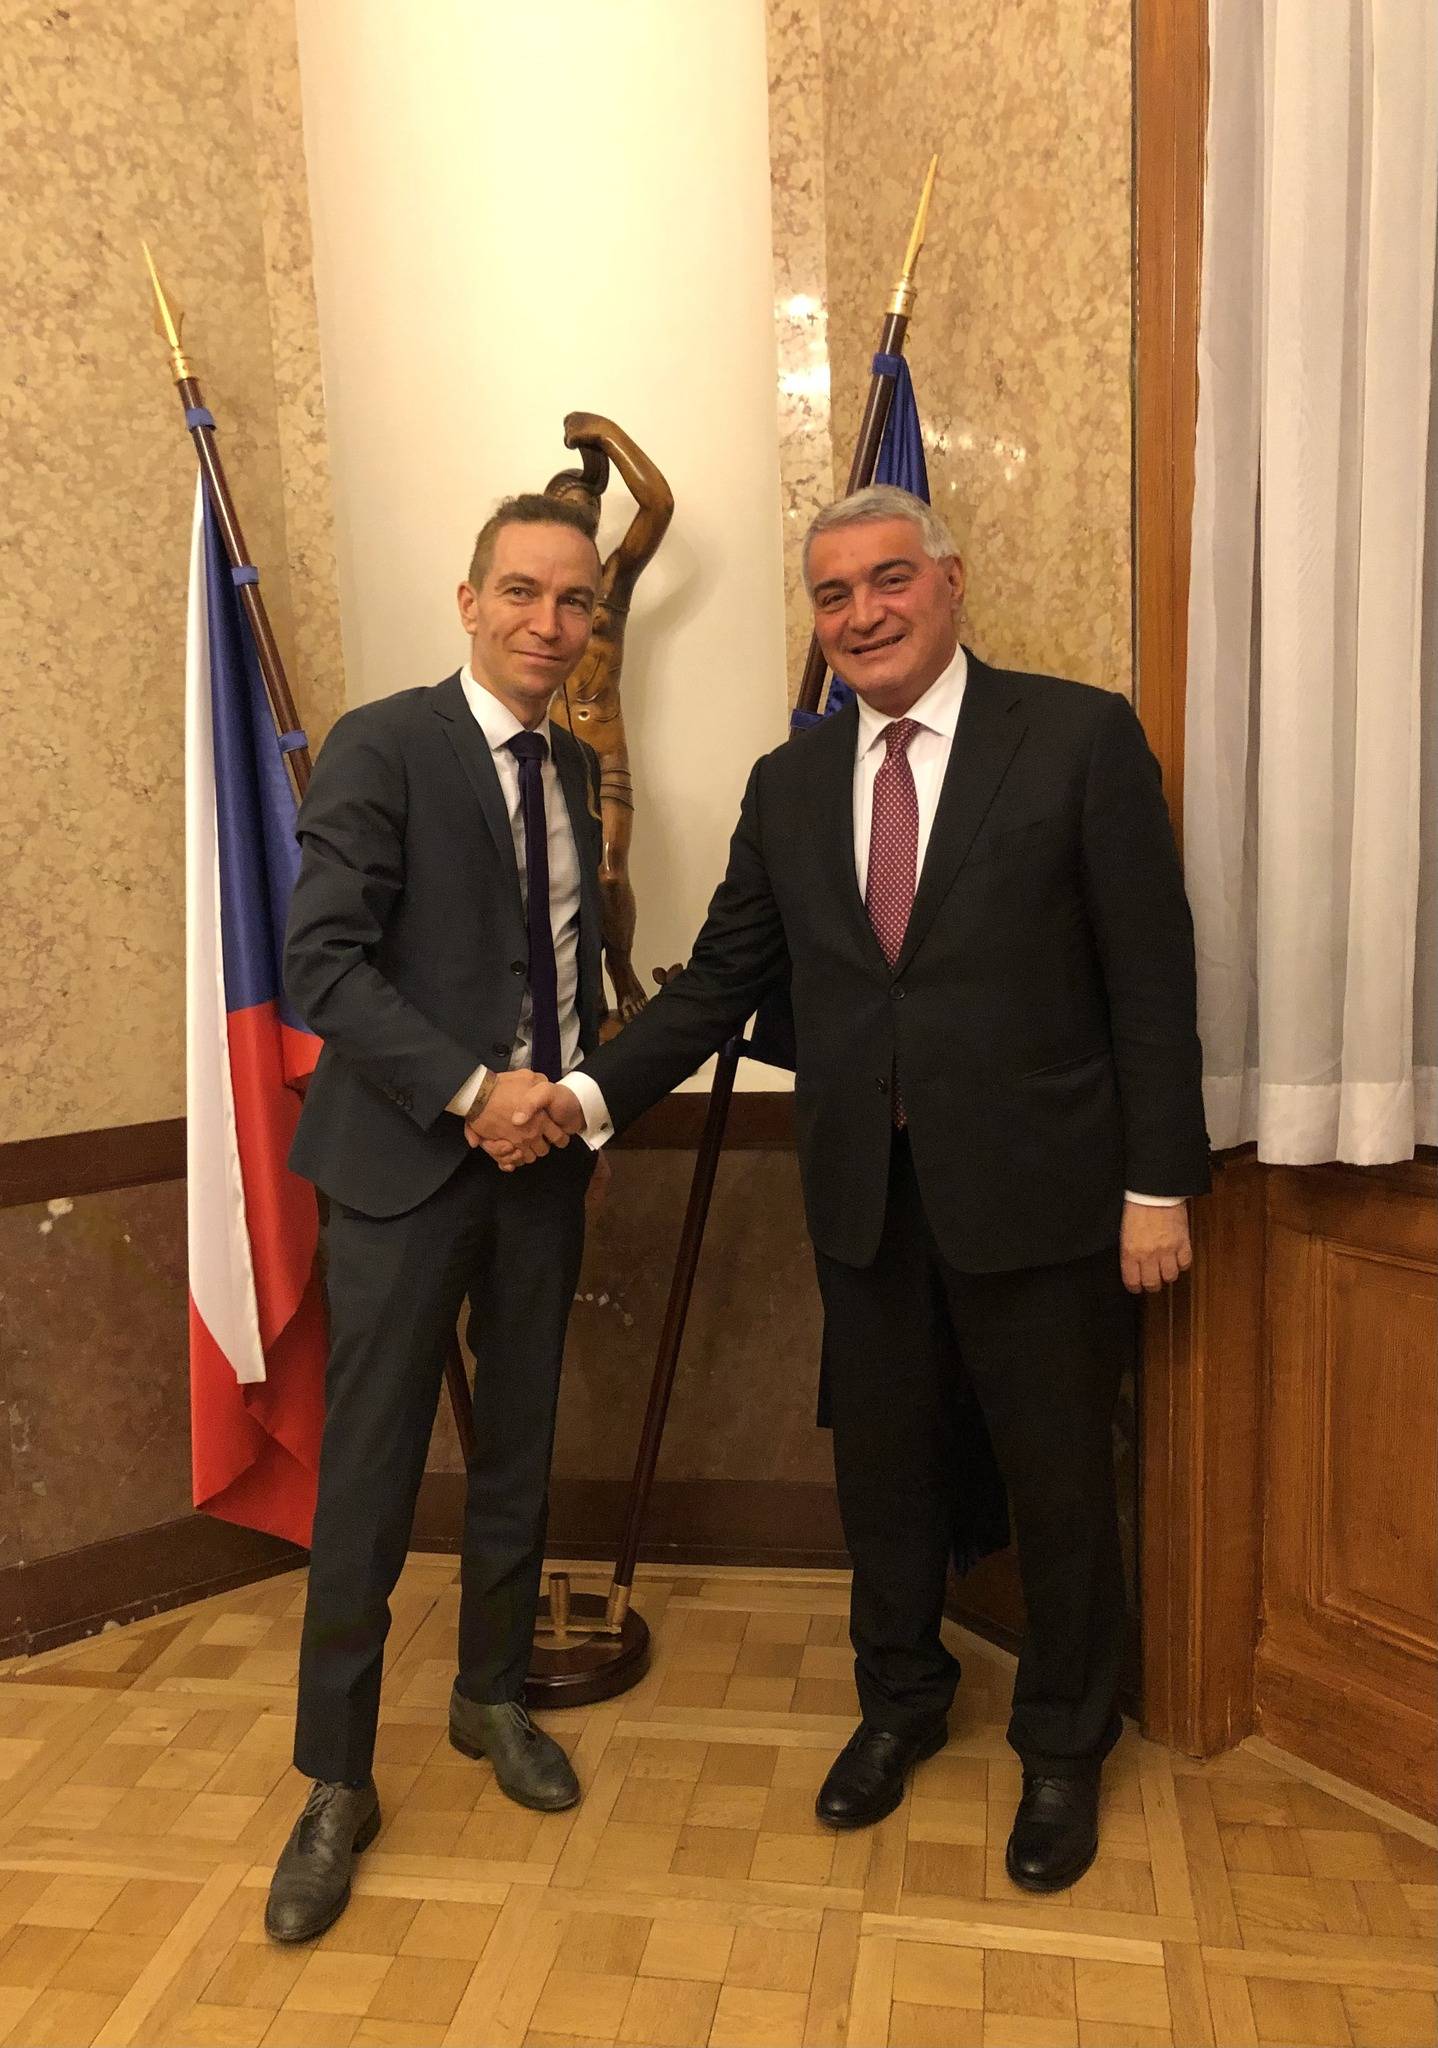 Ambassador Ashot Hovakimian was received by the Deputy Prime Minister for Digitalization and Minister for Regional Development of Czechia Ivan Bartoš